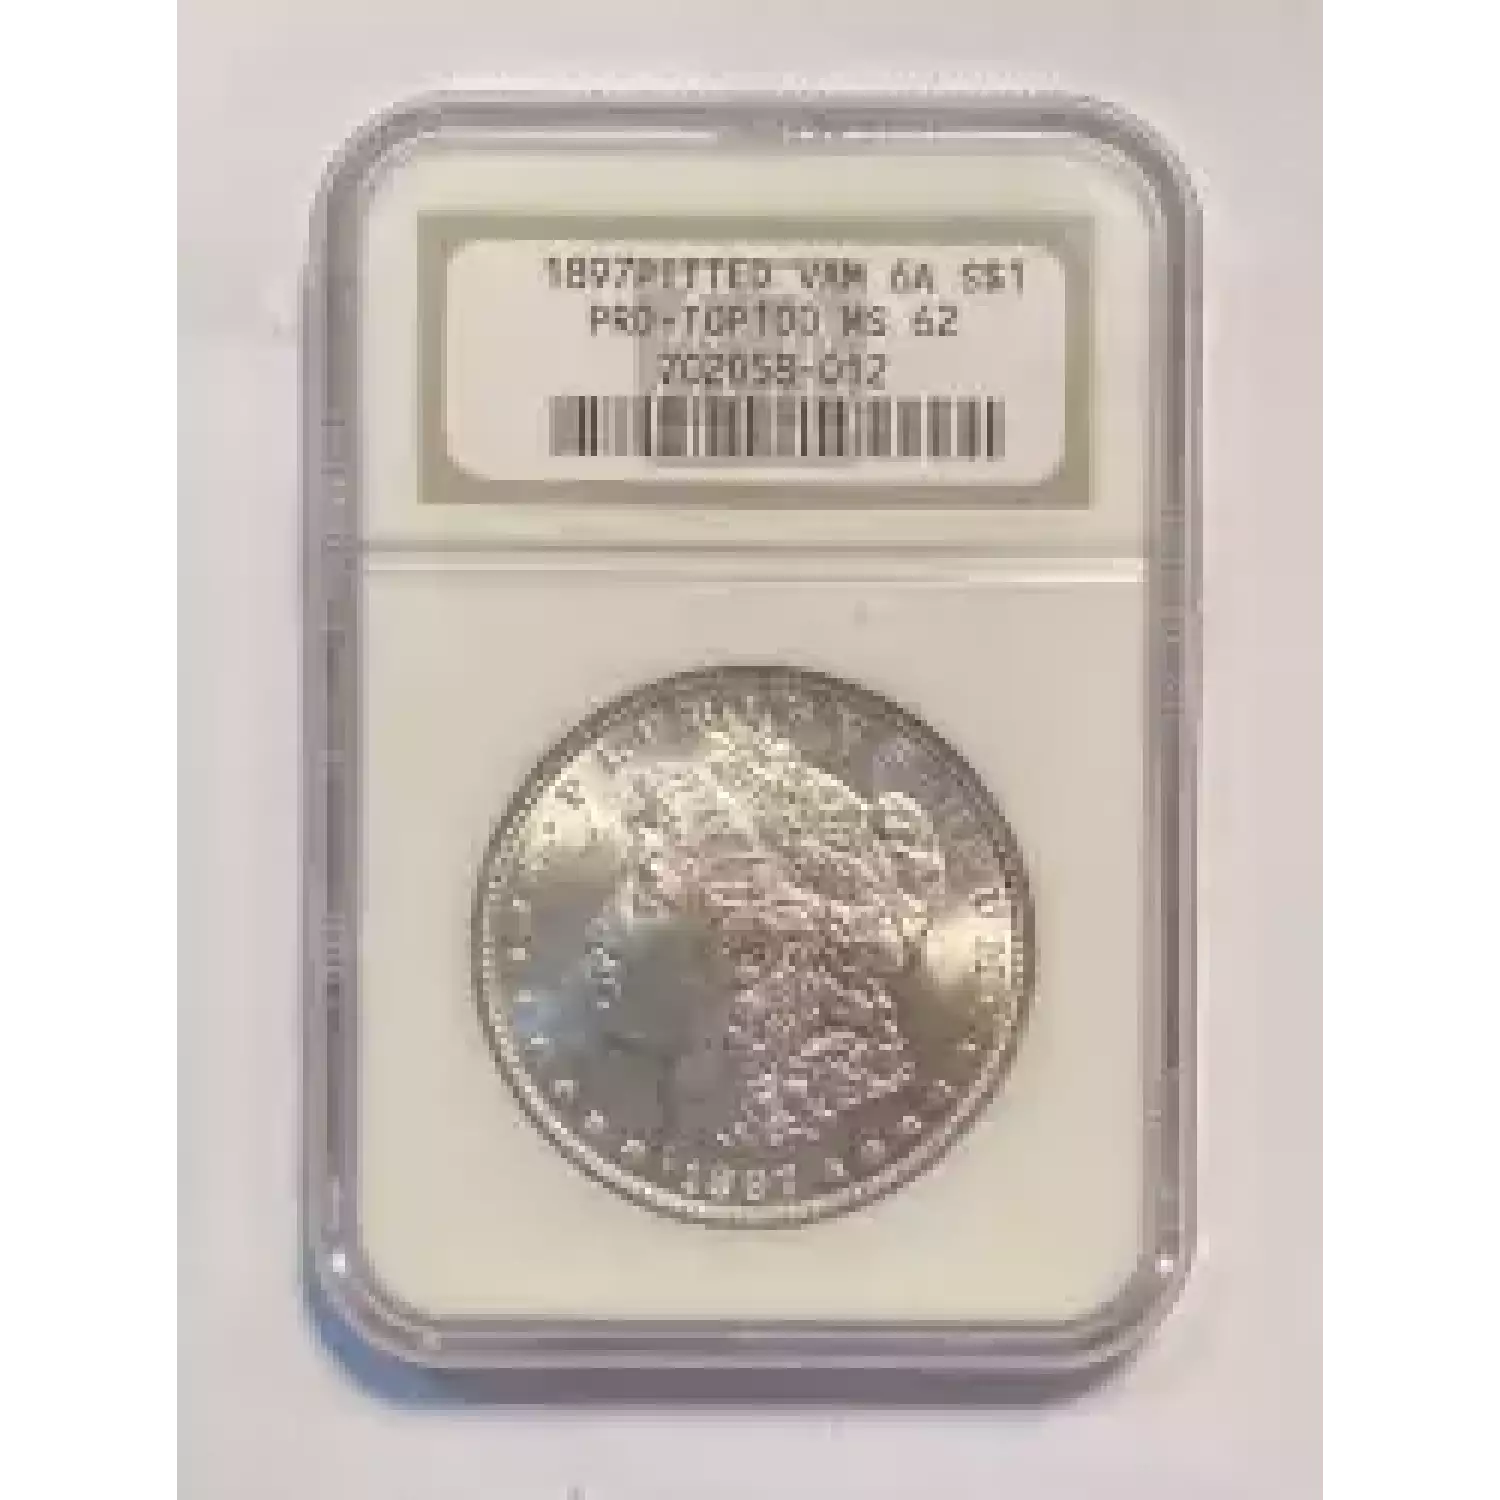 1897 VAM-6A PITTED REVERSE 